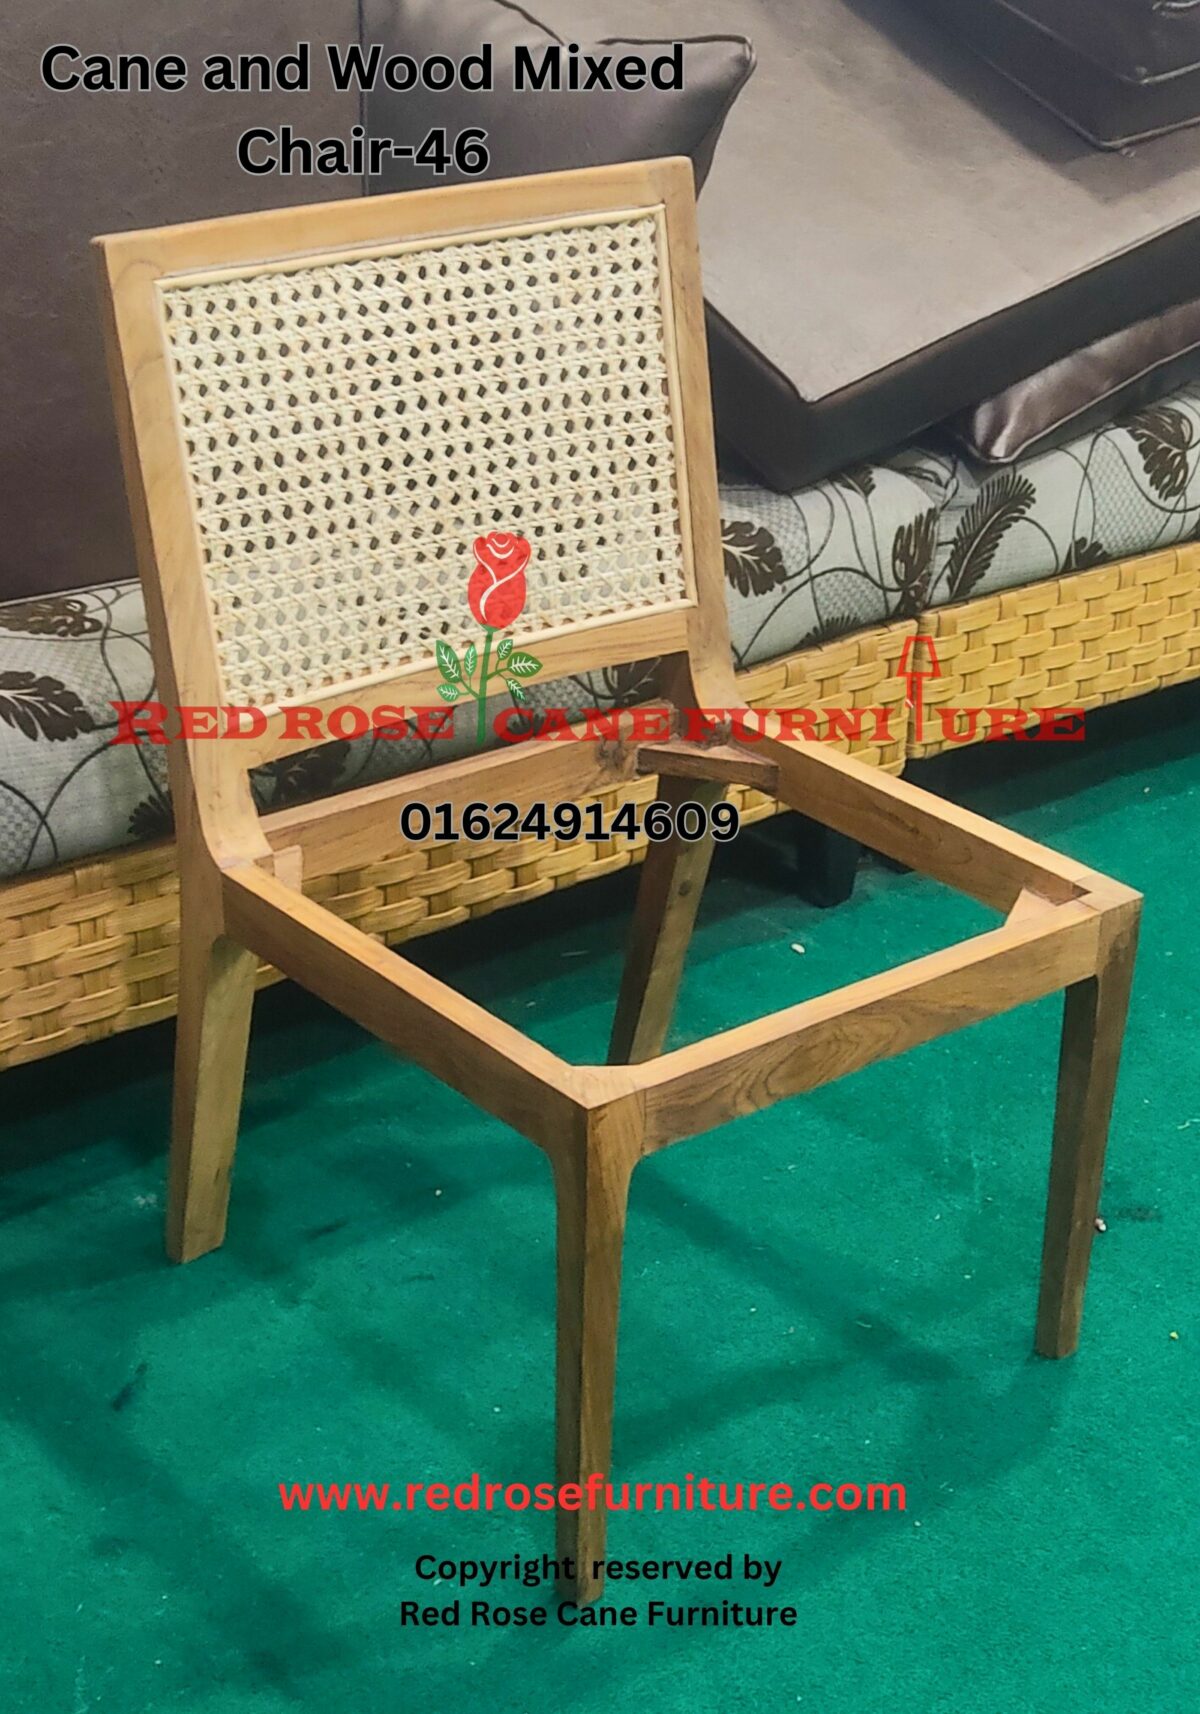 Cane and Wood Mixed Chair-46